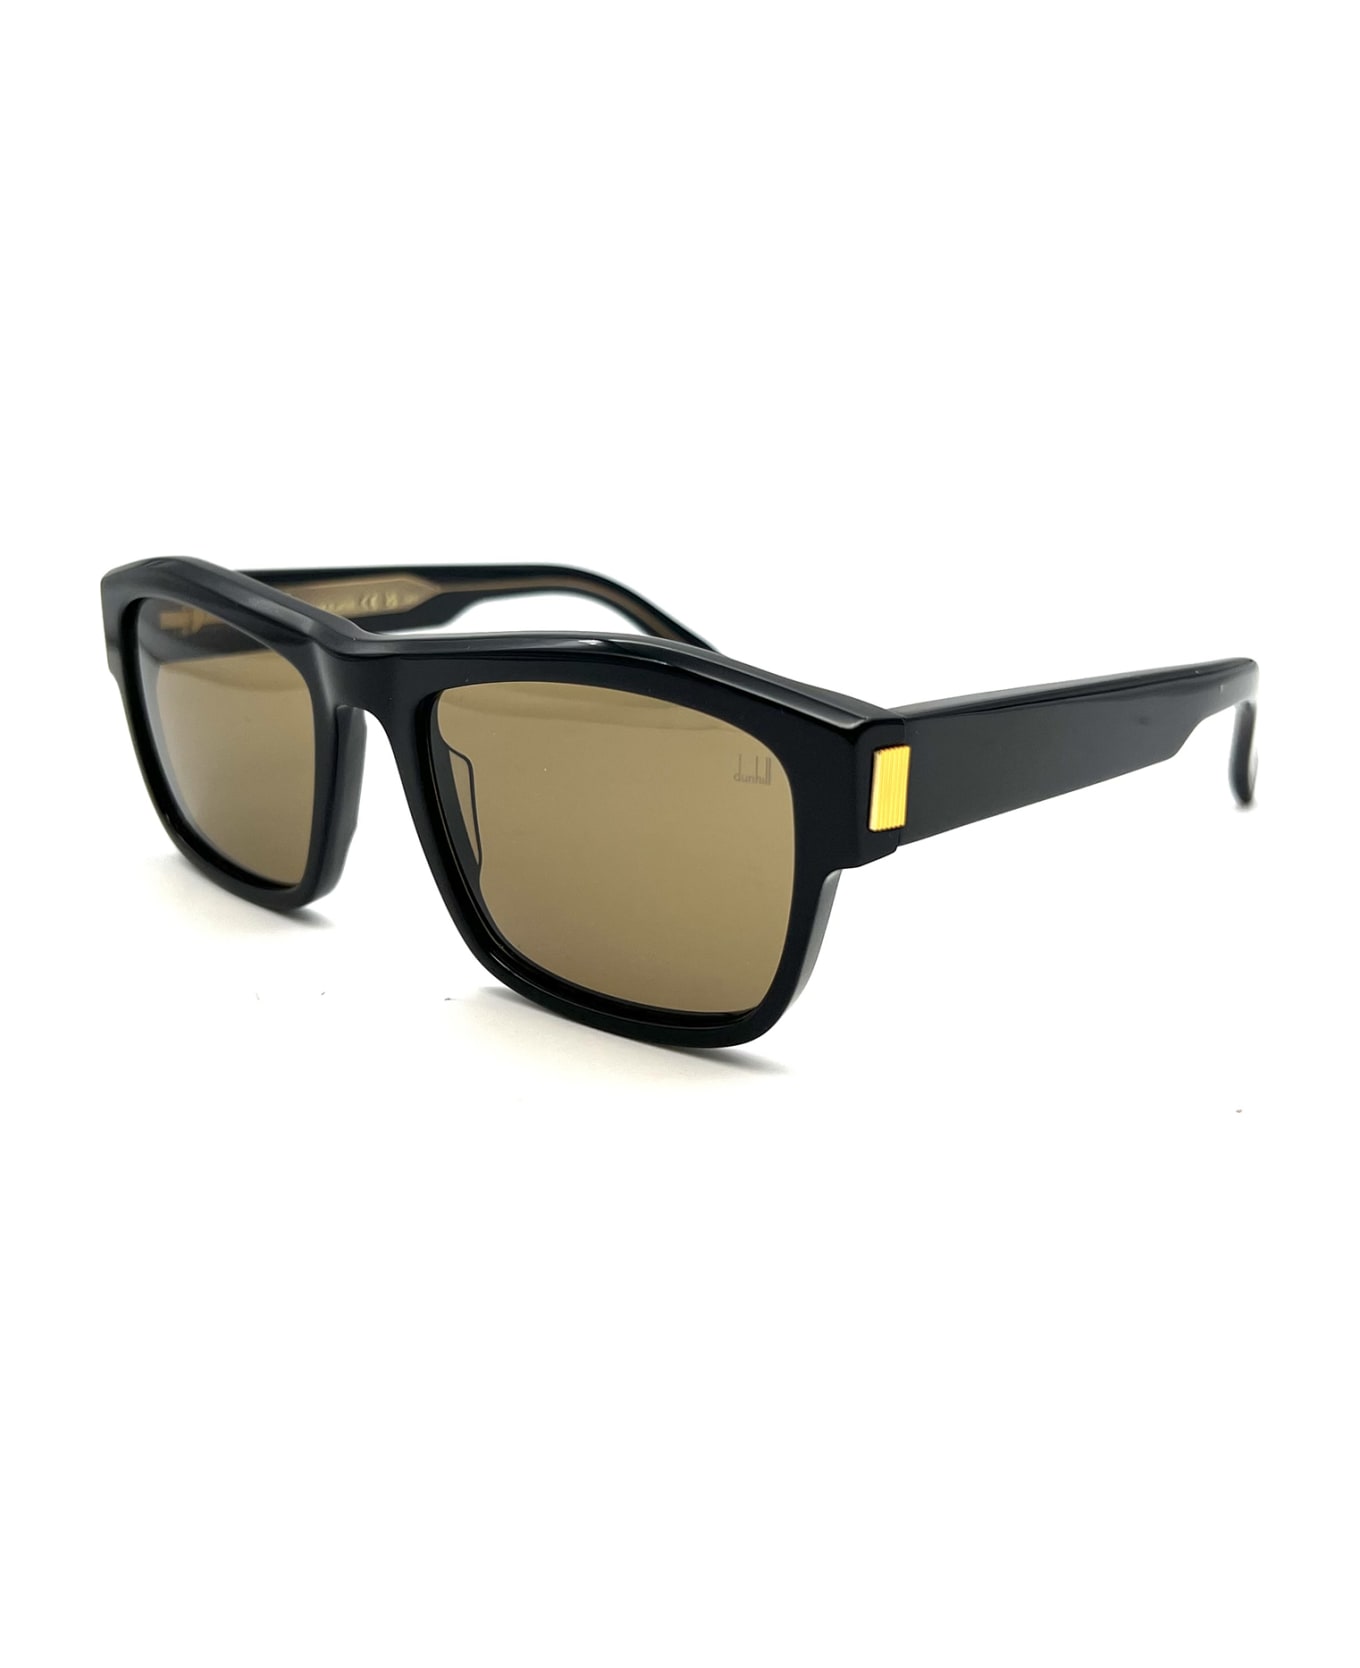 Dunhill DU0029S Sunglasses - Introducing the Model 5 sunglasses